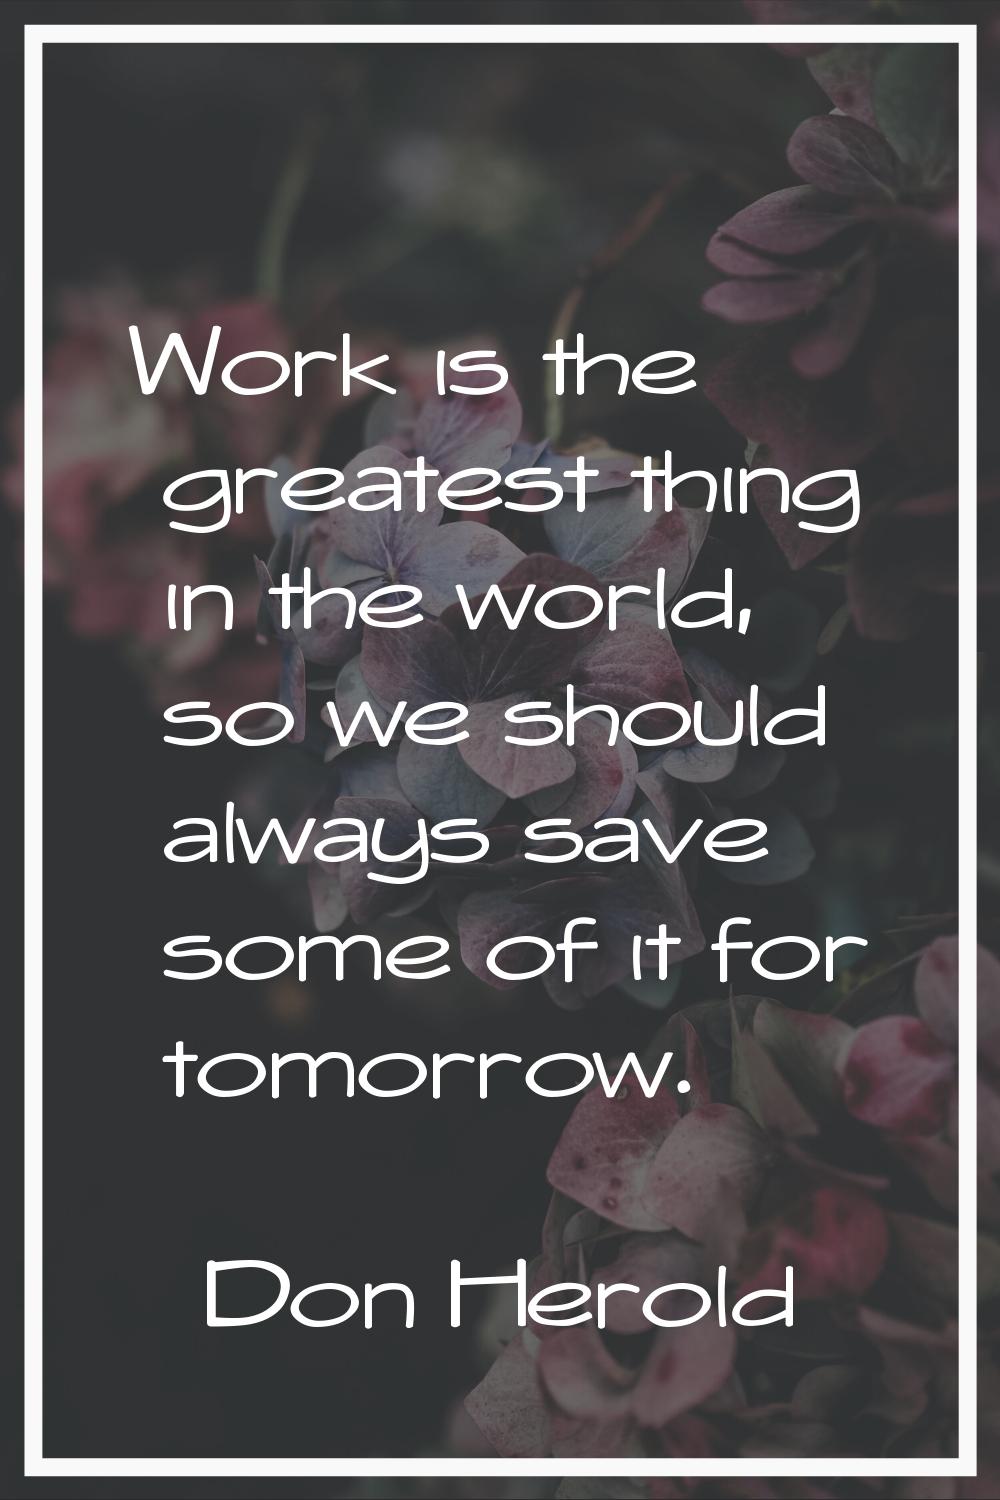 Work is the greatest thing in the world, so we should always save some of it for tomorrow.